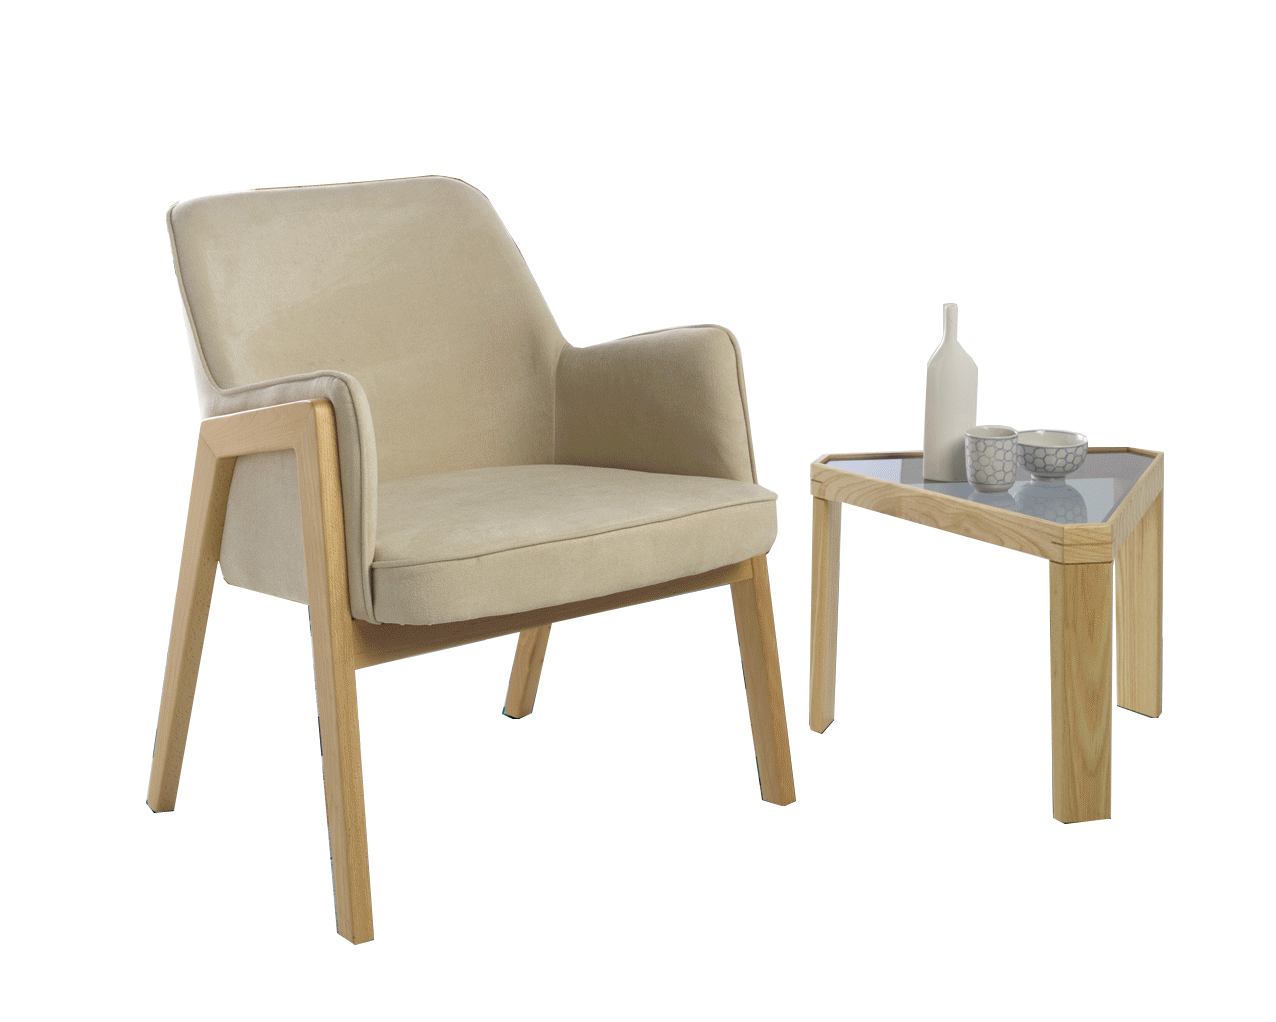 Brands Dupen Dining Rooms, Spain DC-1365 Chair, CT-1419